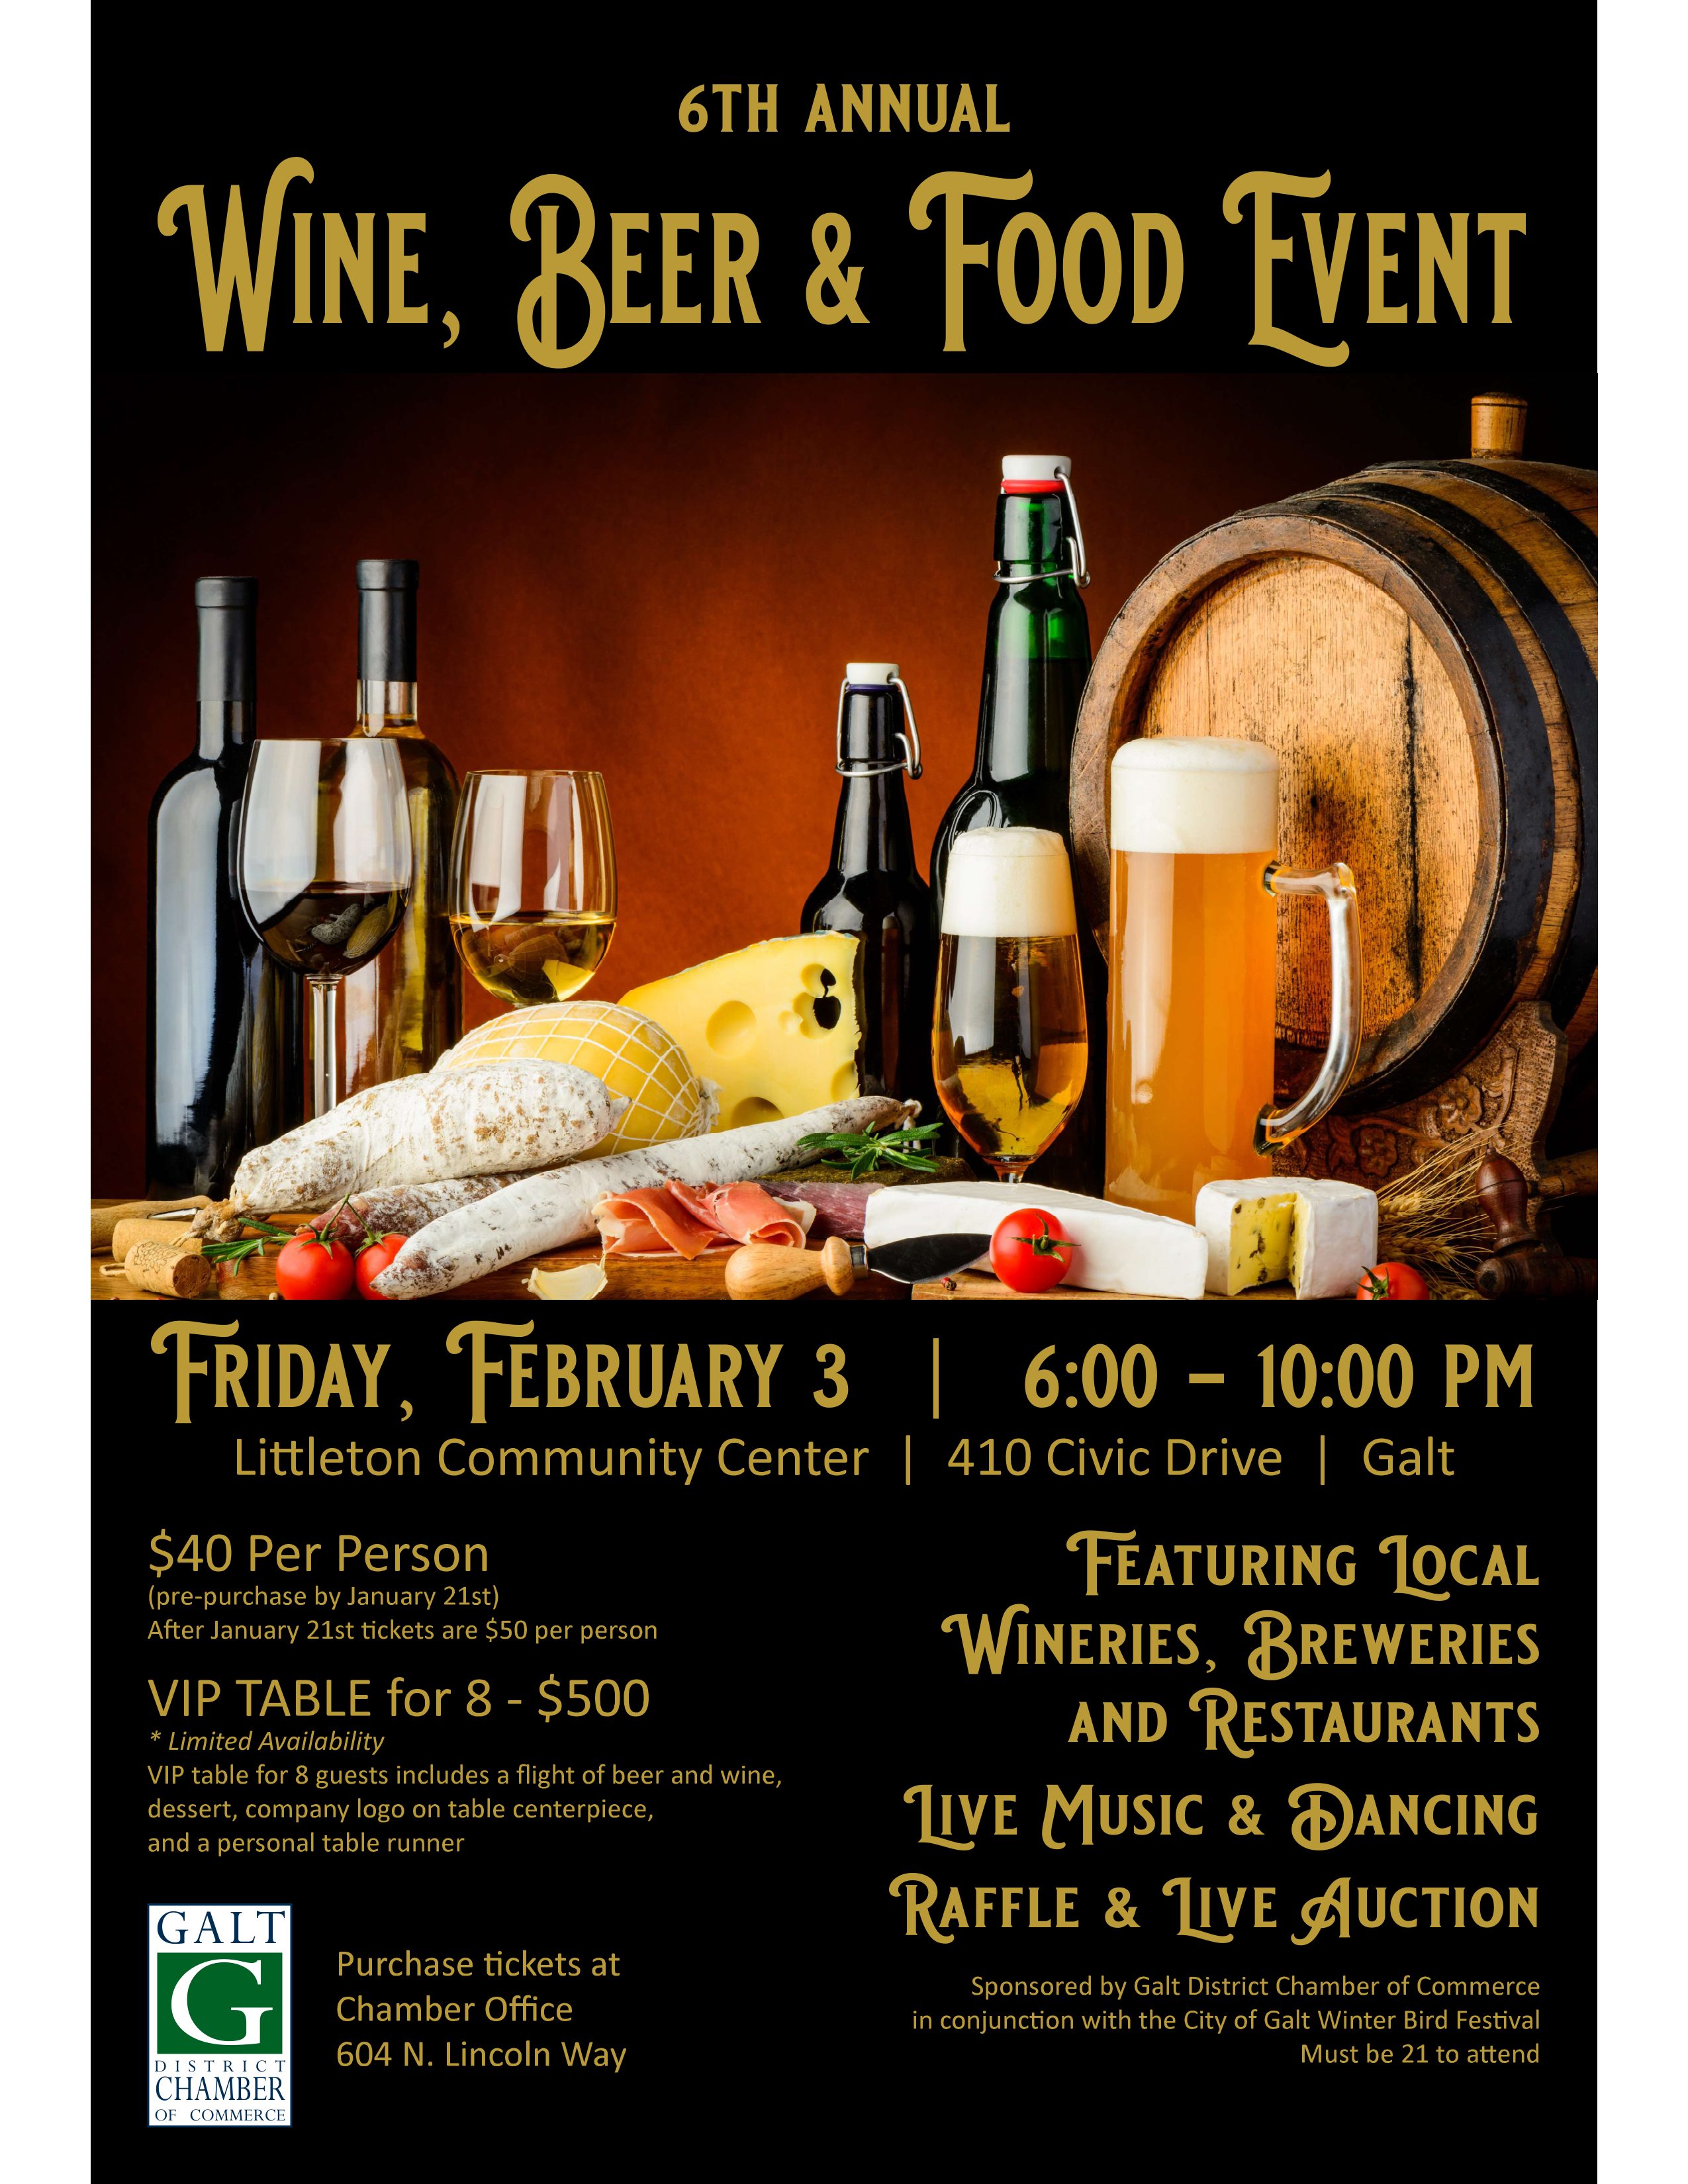 6th Annual Wine, Beer & Food Event, 2/3/2022, 6-10pm, 410 Civic Dr, Galt, $40 per person through 1/21, then $50 per person after and at the door